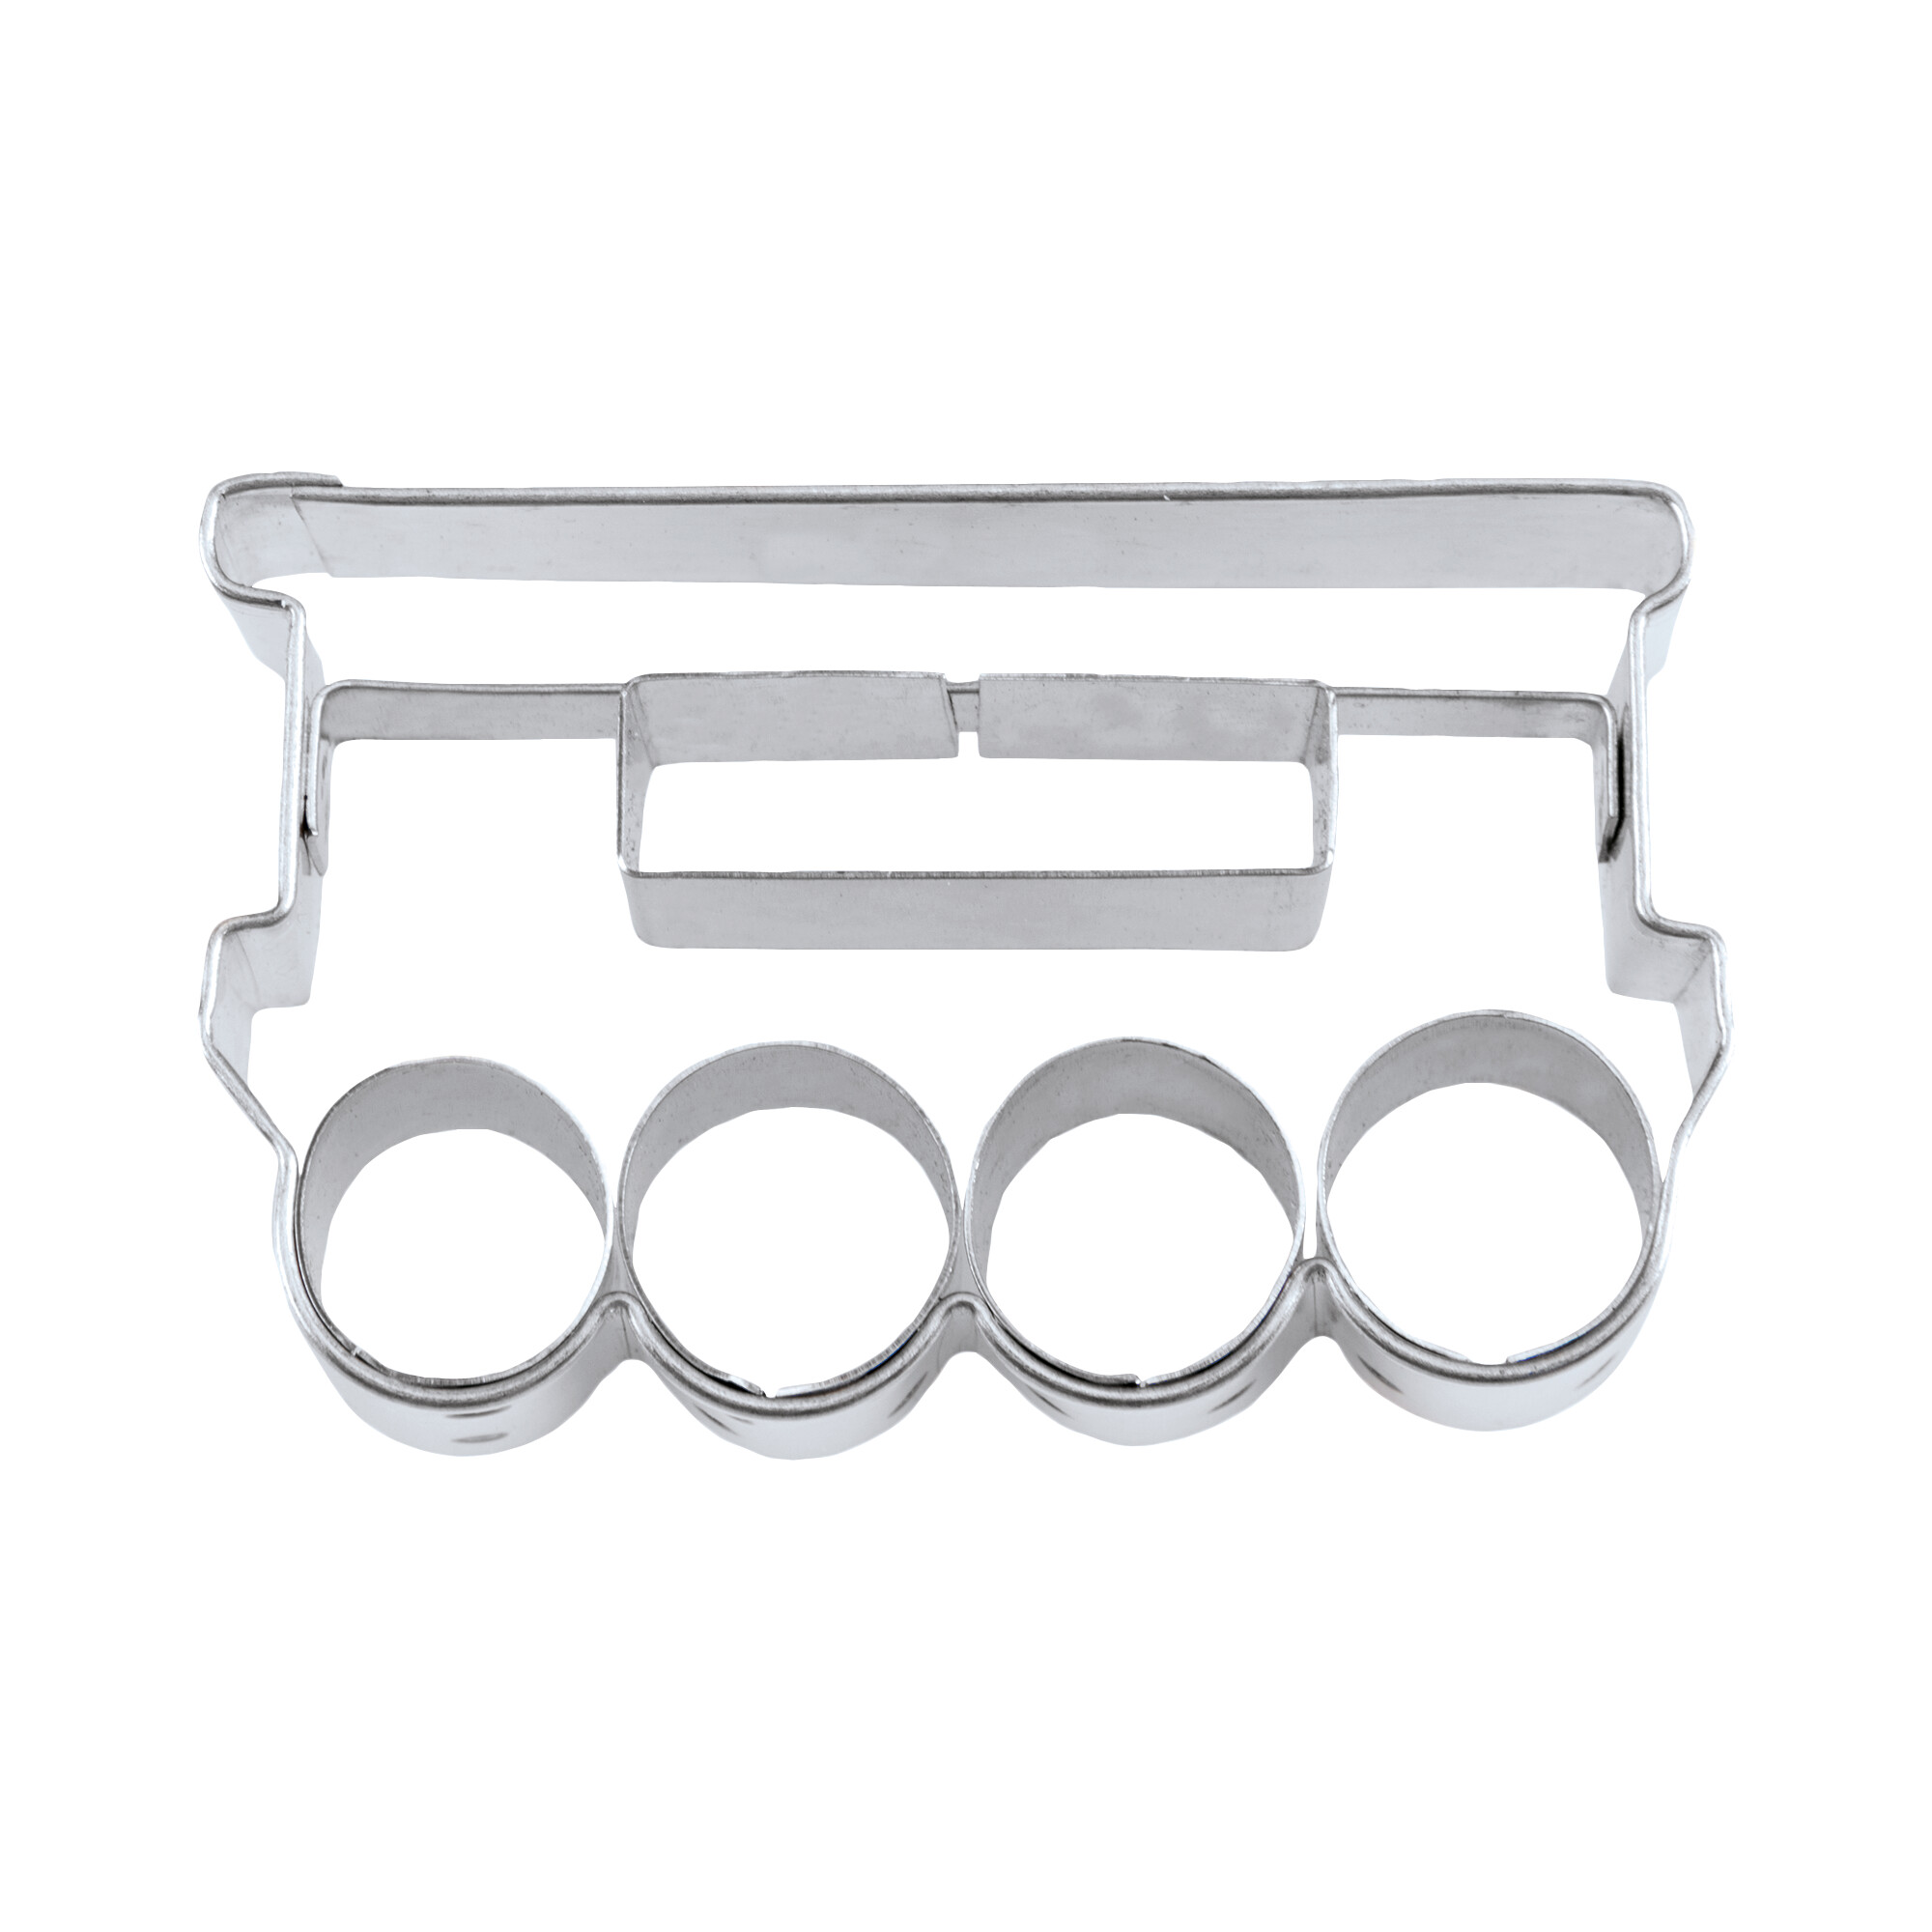 Cookie cutter with stamp – Railway carriage